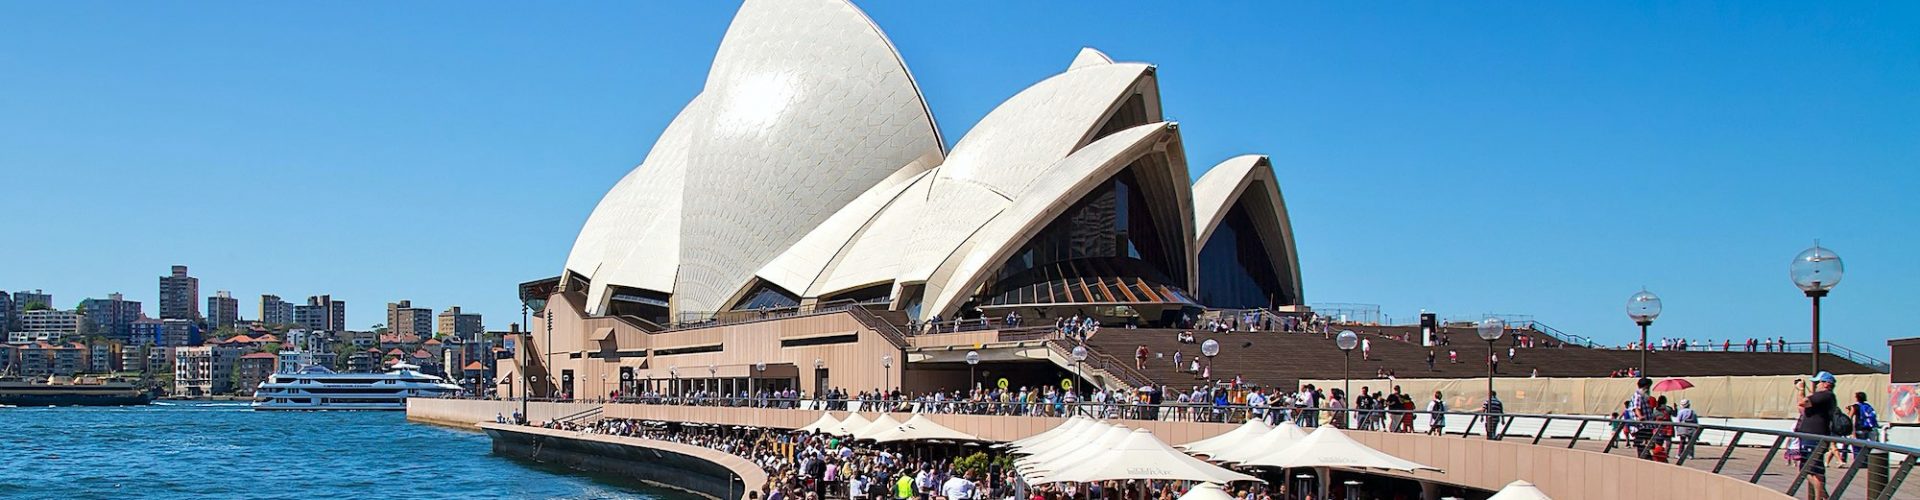 Top 10 Things to Do in Sydney on a First Visit inner banner